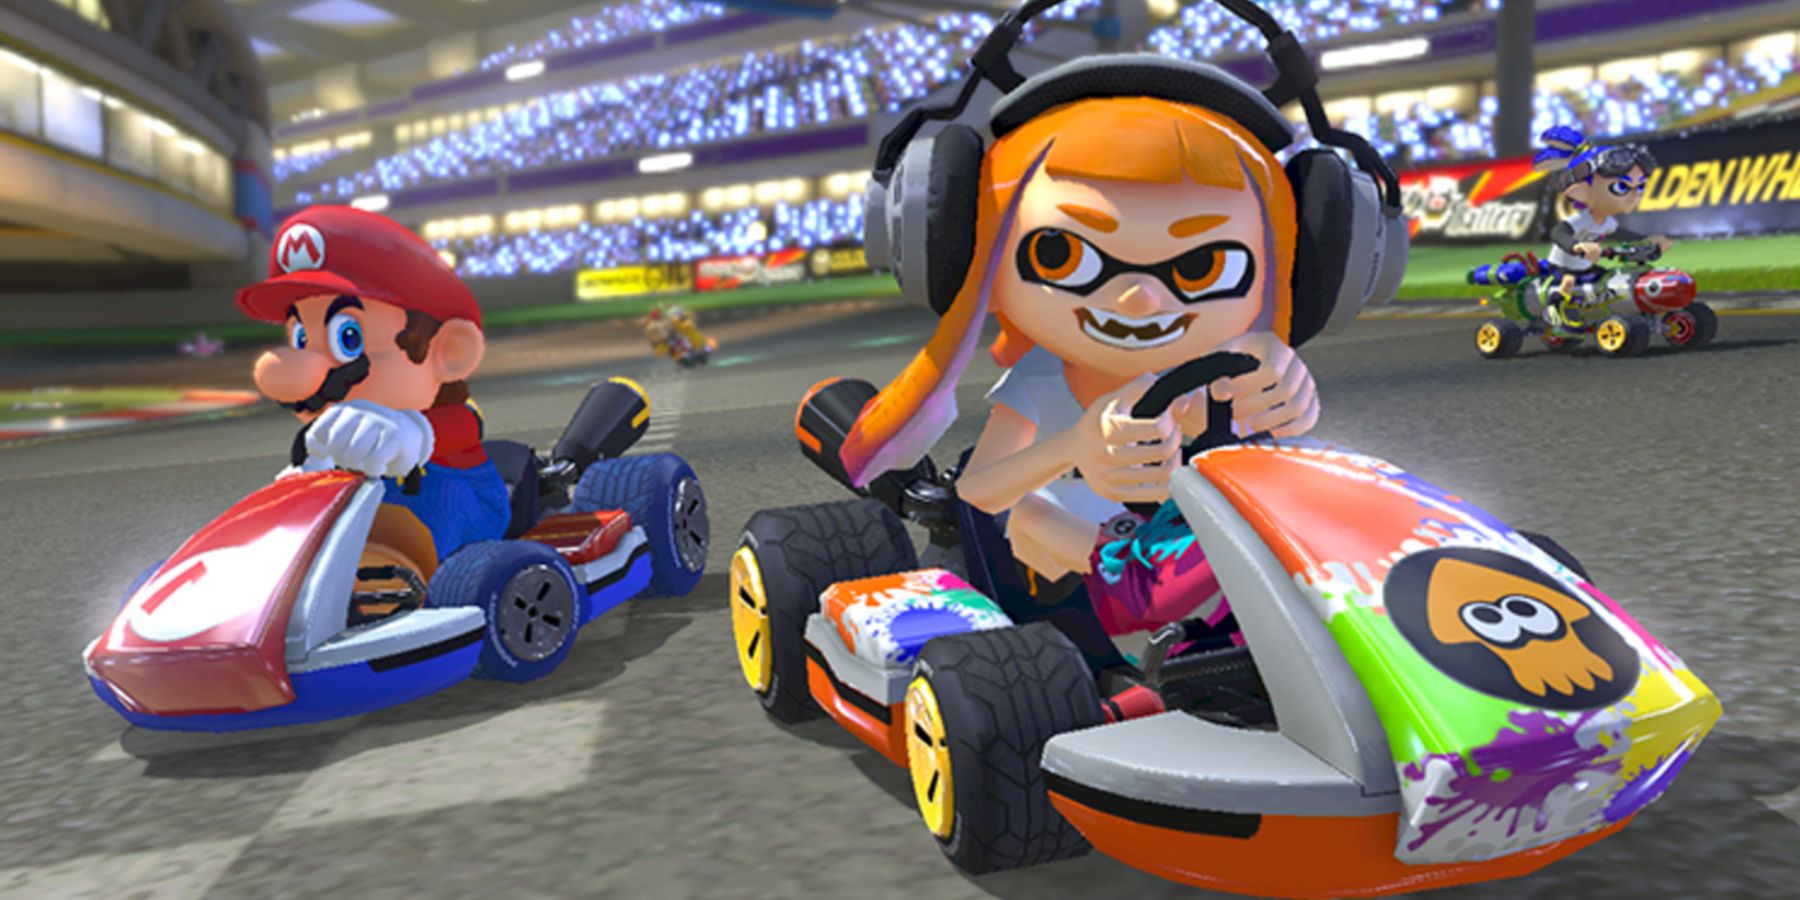 There are plenty of Nintendo characters that could be put in Mario Kart 9